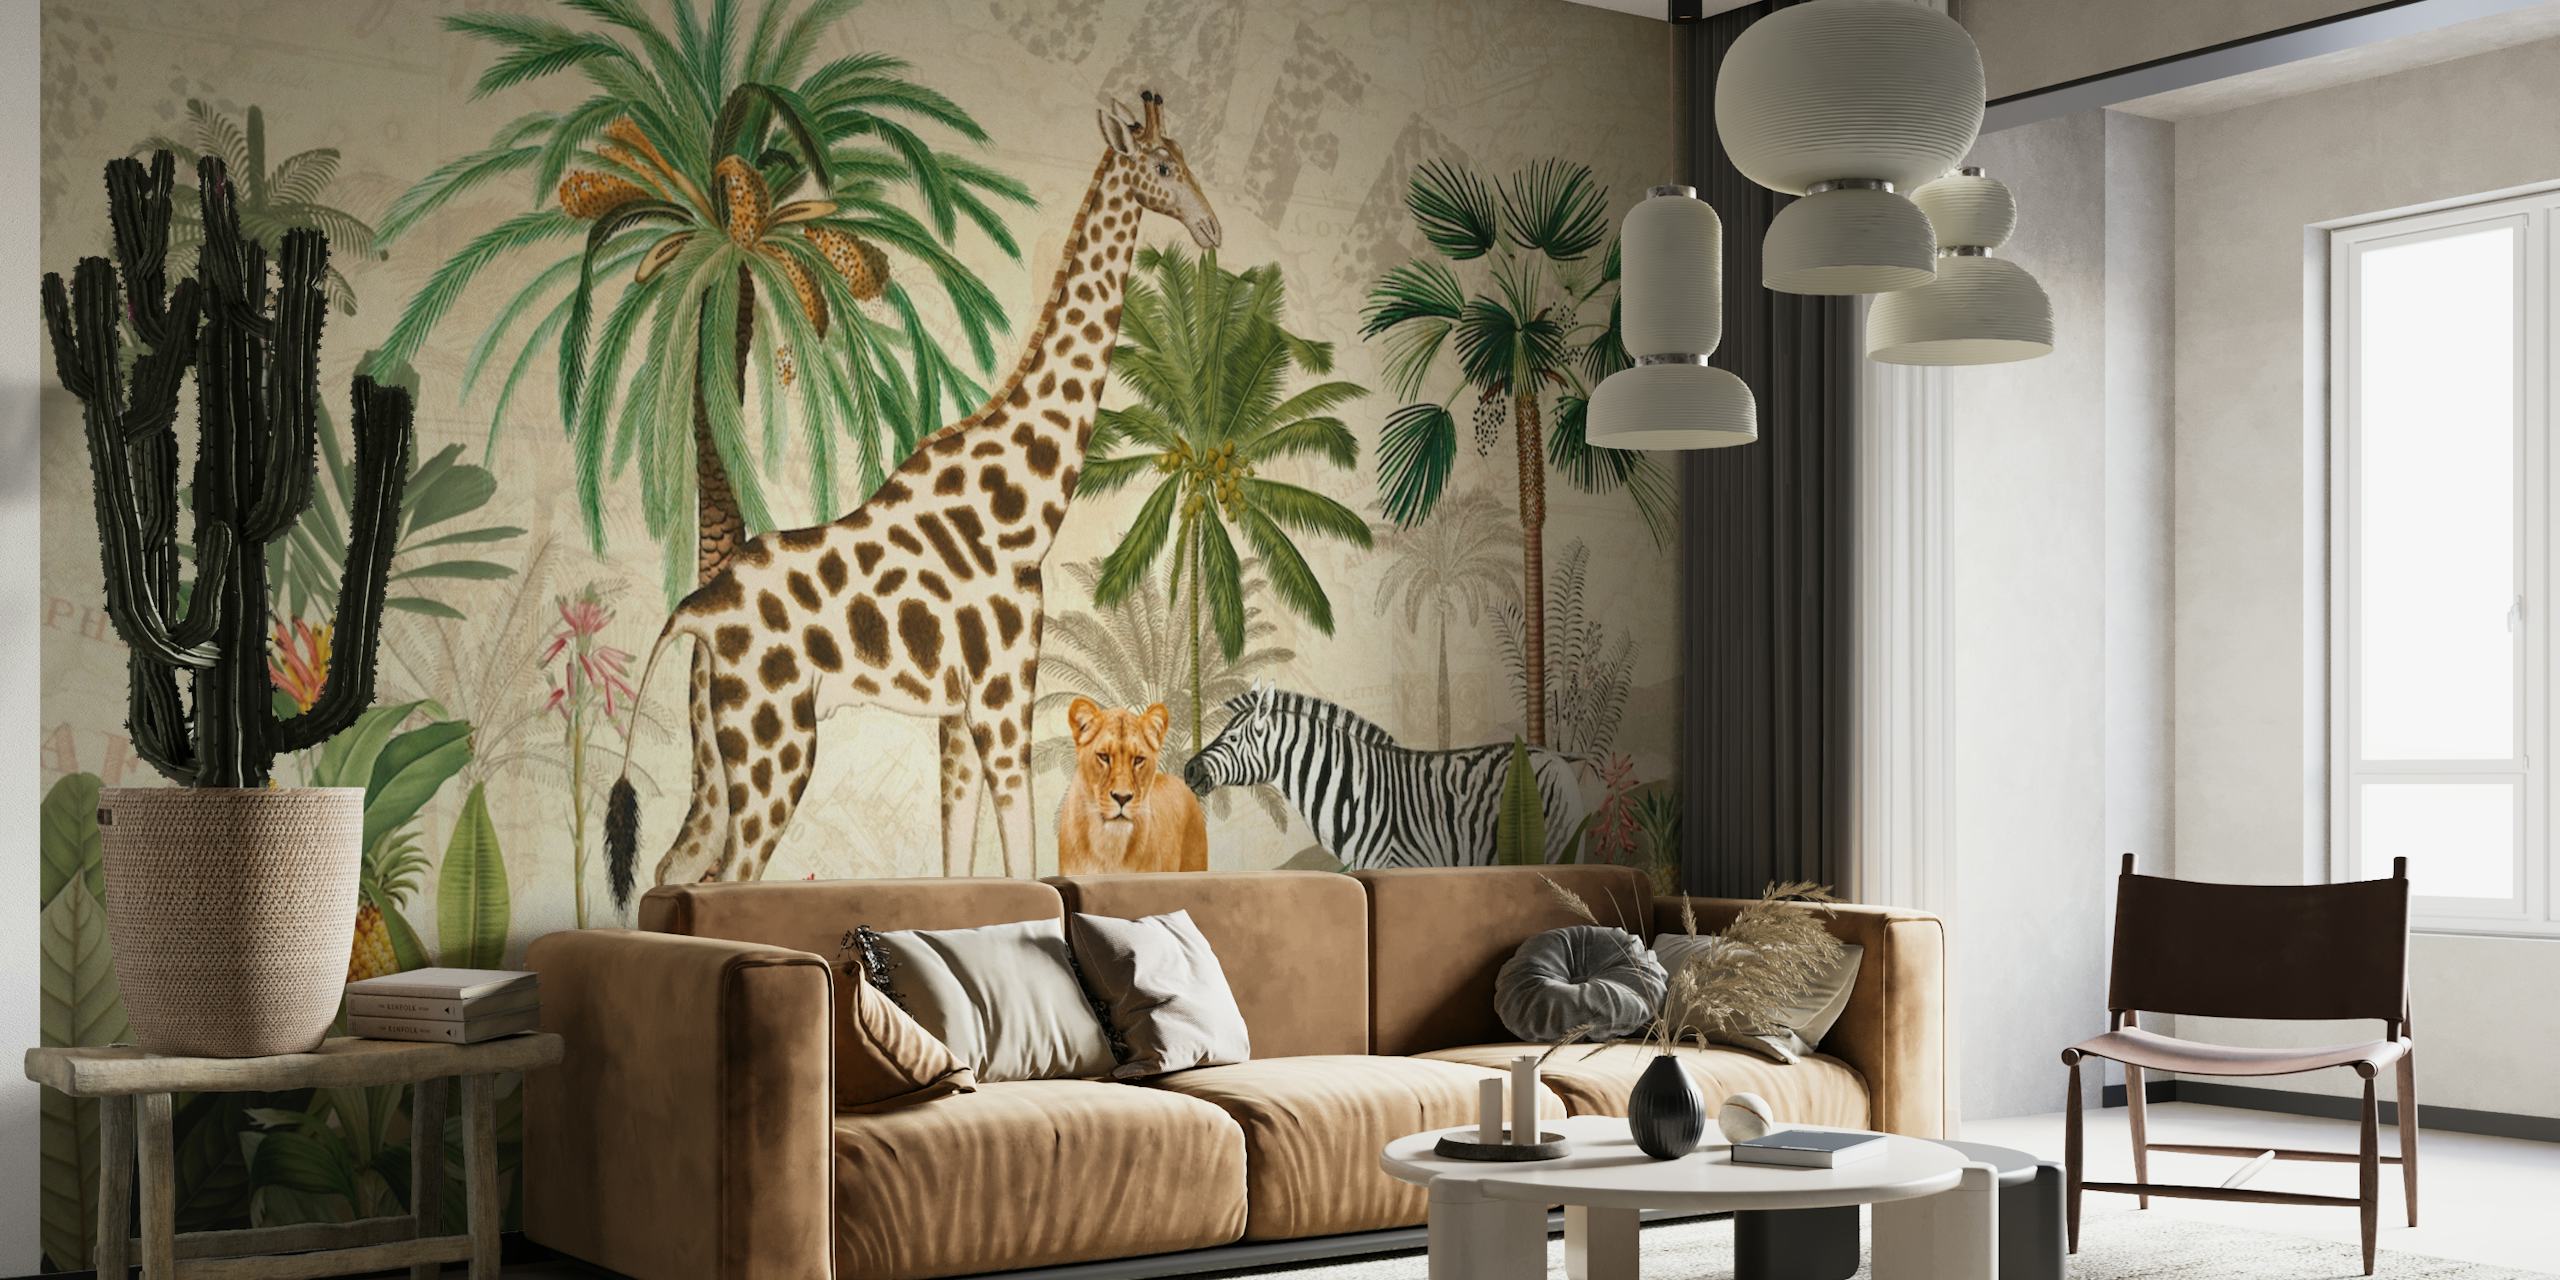 Vintage style jungle safari wall mural featuring giraffes, leopards, and zebras in a lush setting